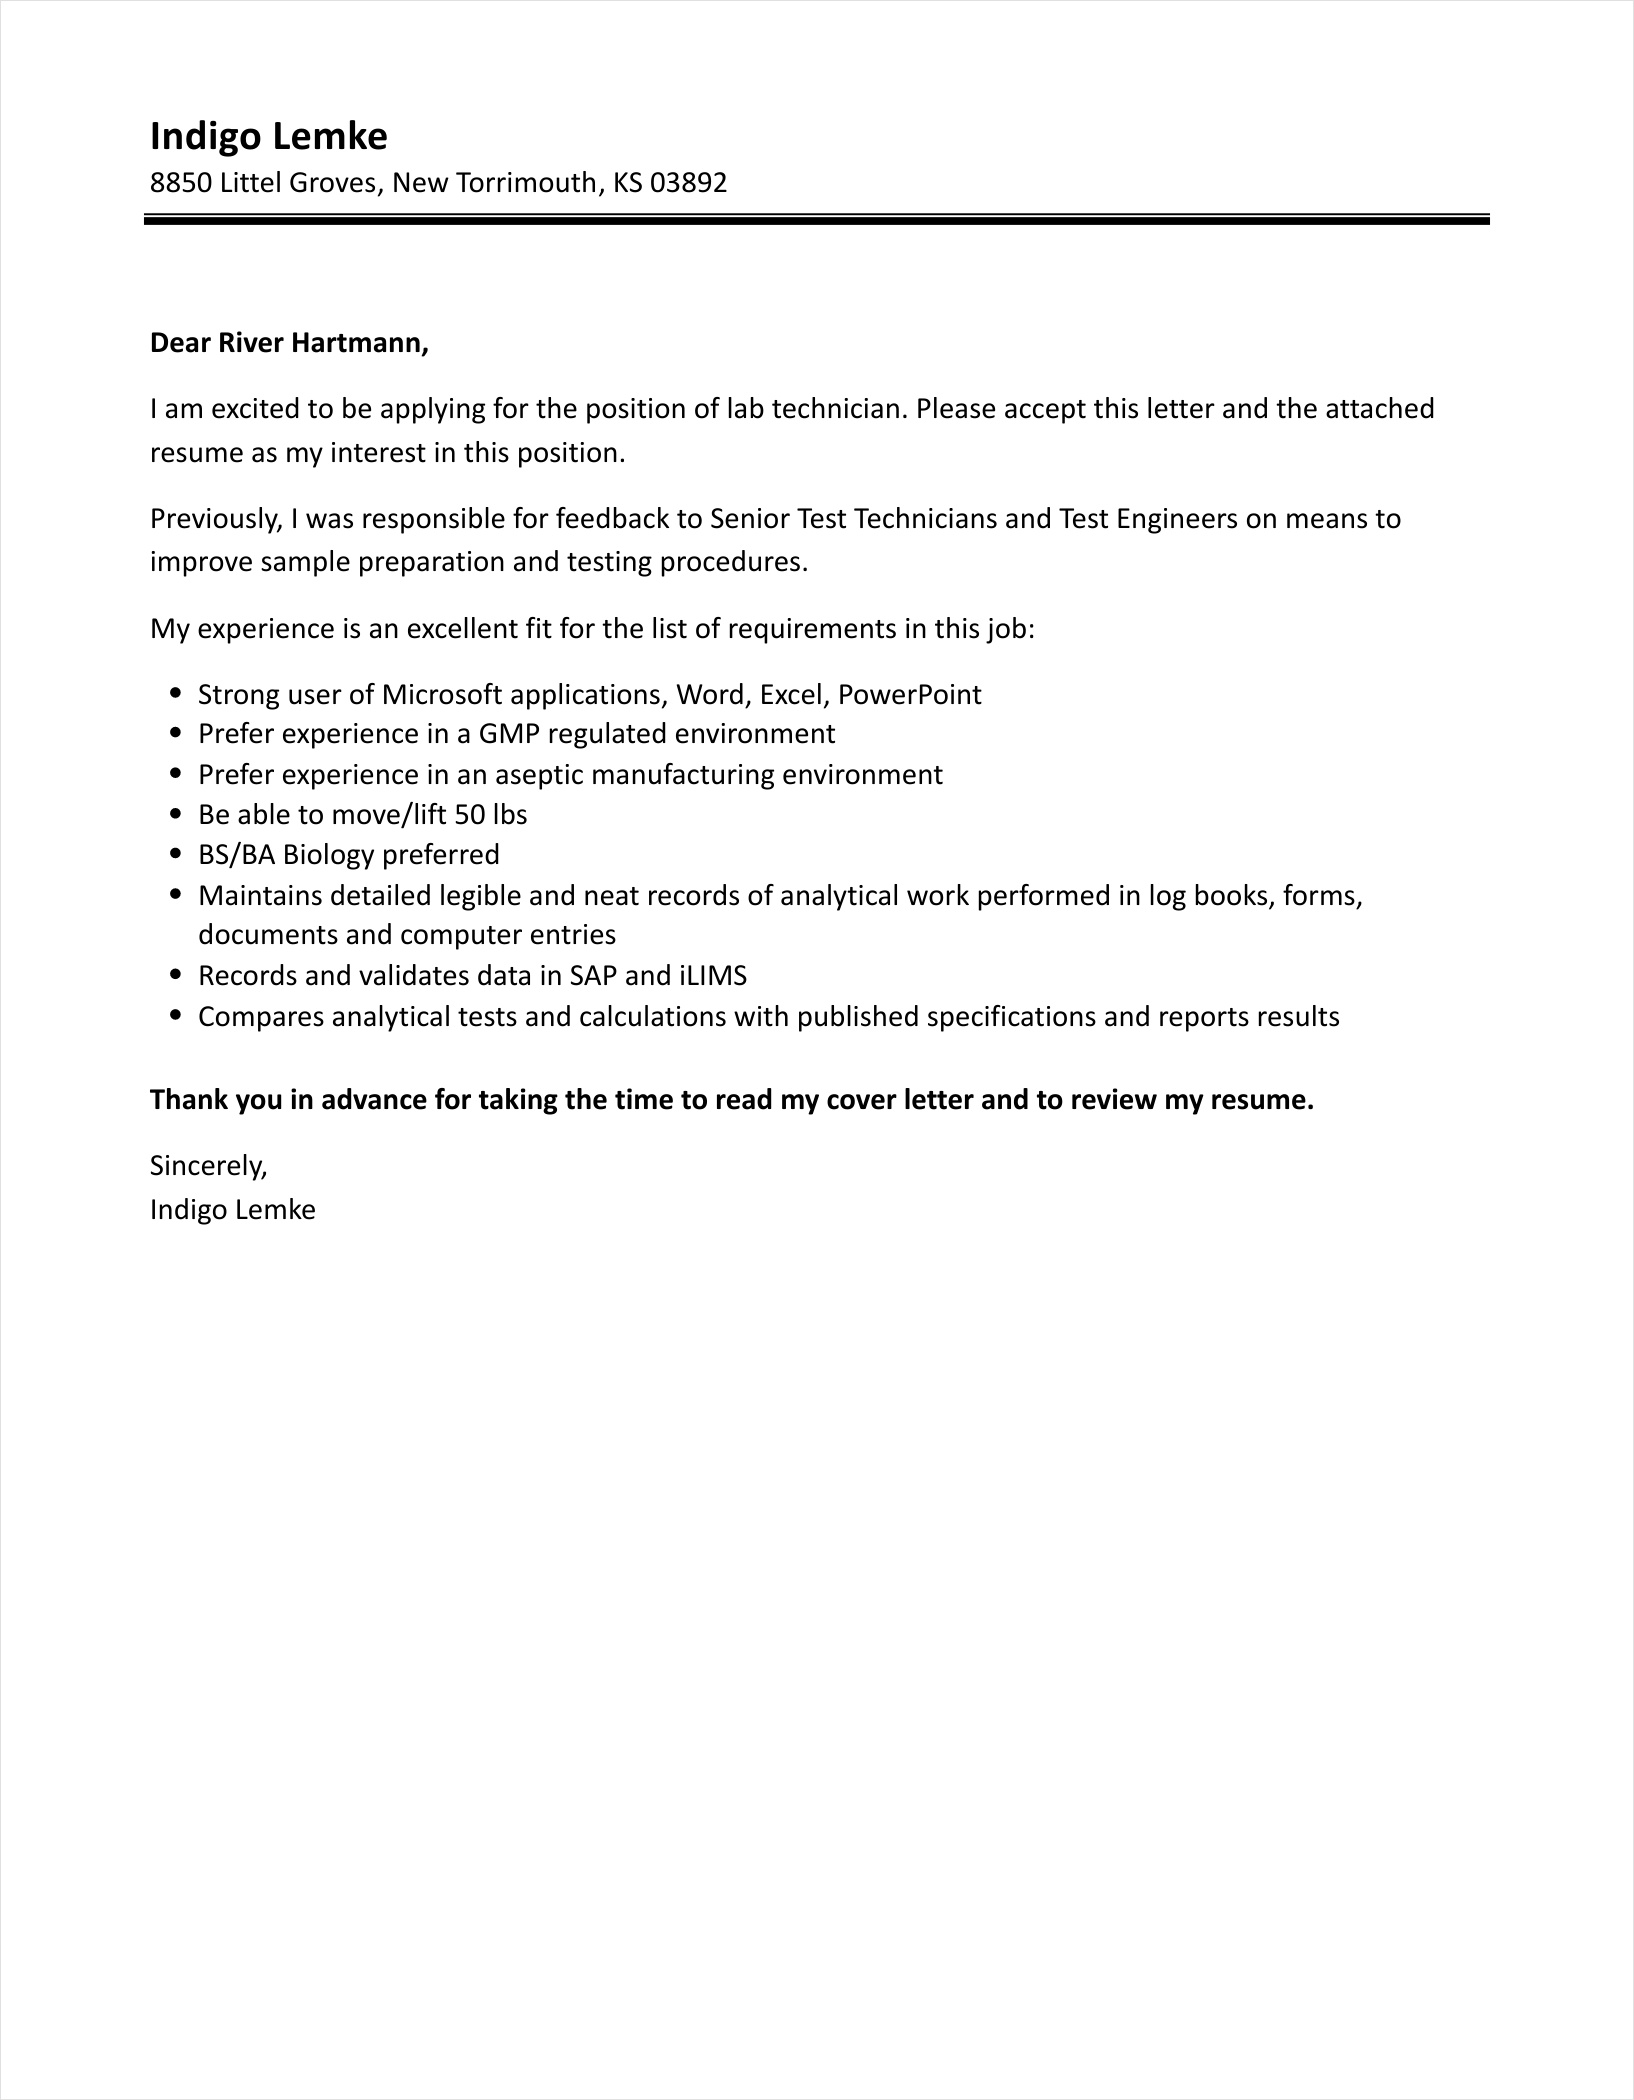 sample of lab technician cover letter template